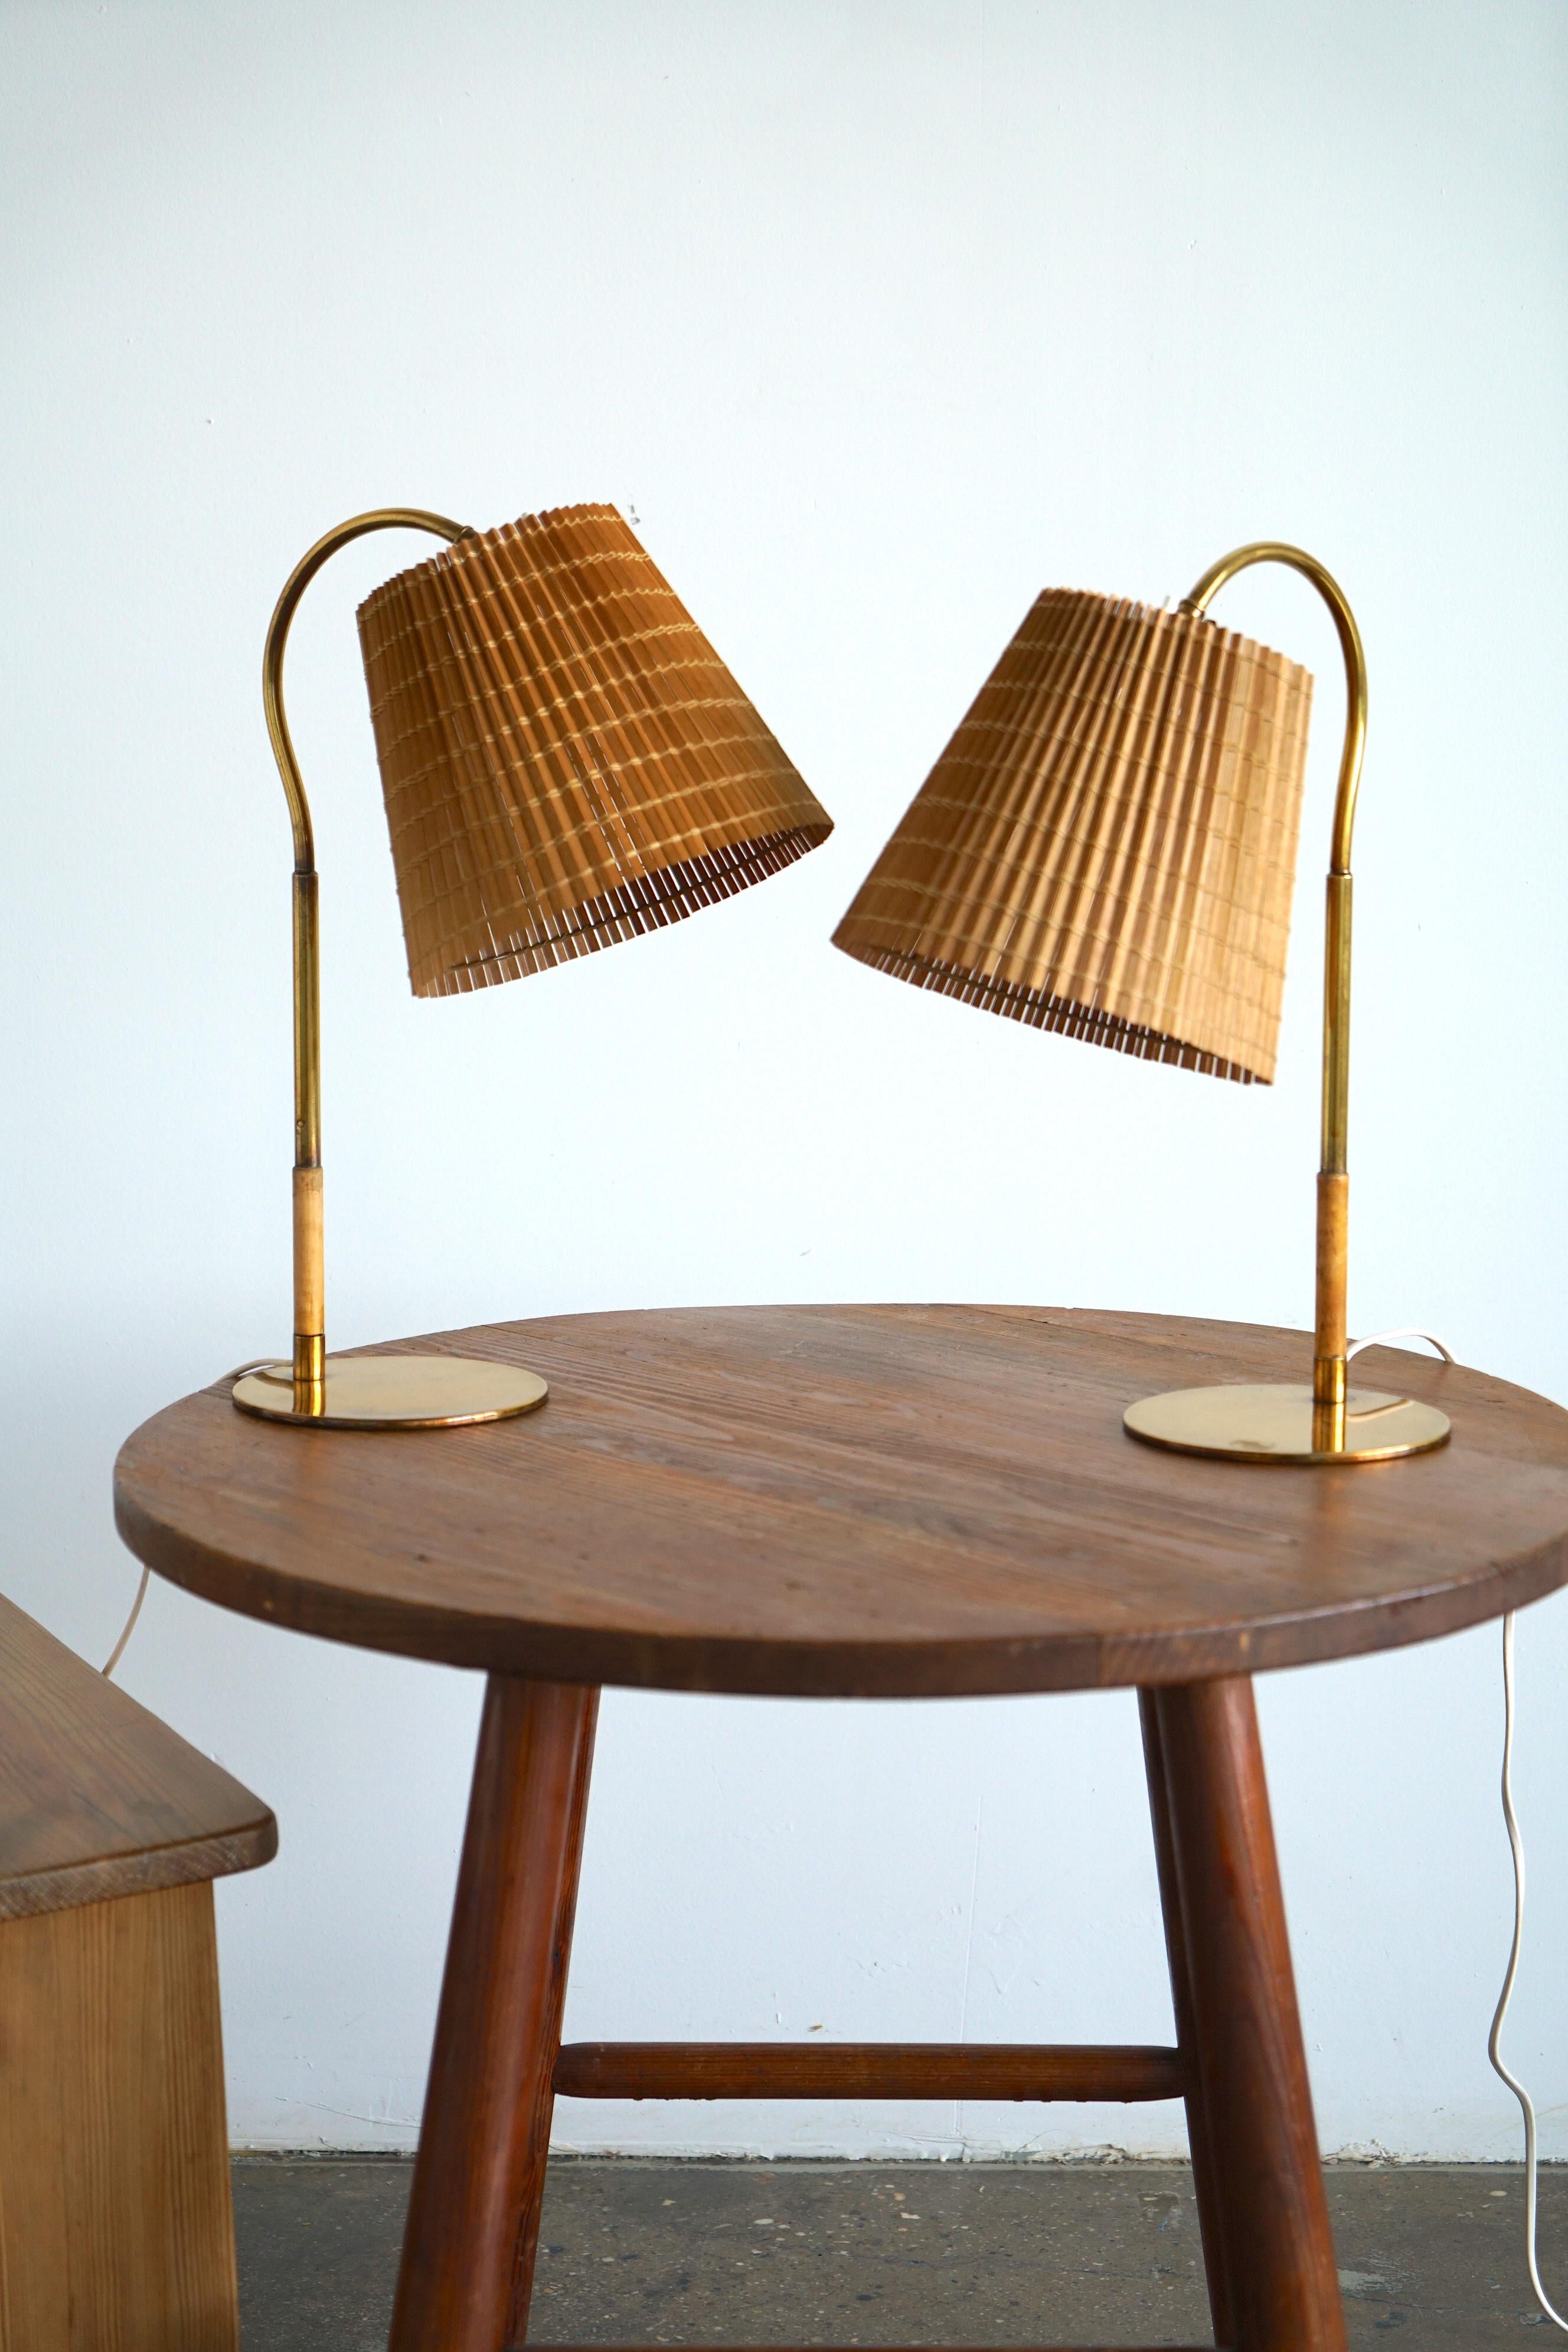 Brass A table lamp by Paavo Tynell, model 9201 / 2 available. For Sale